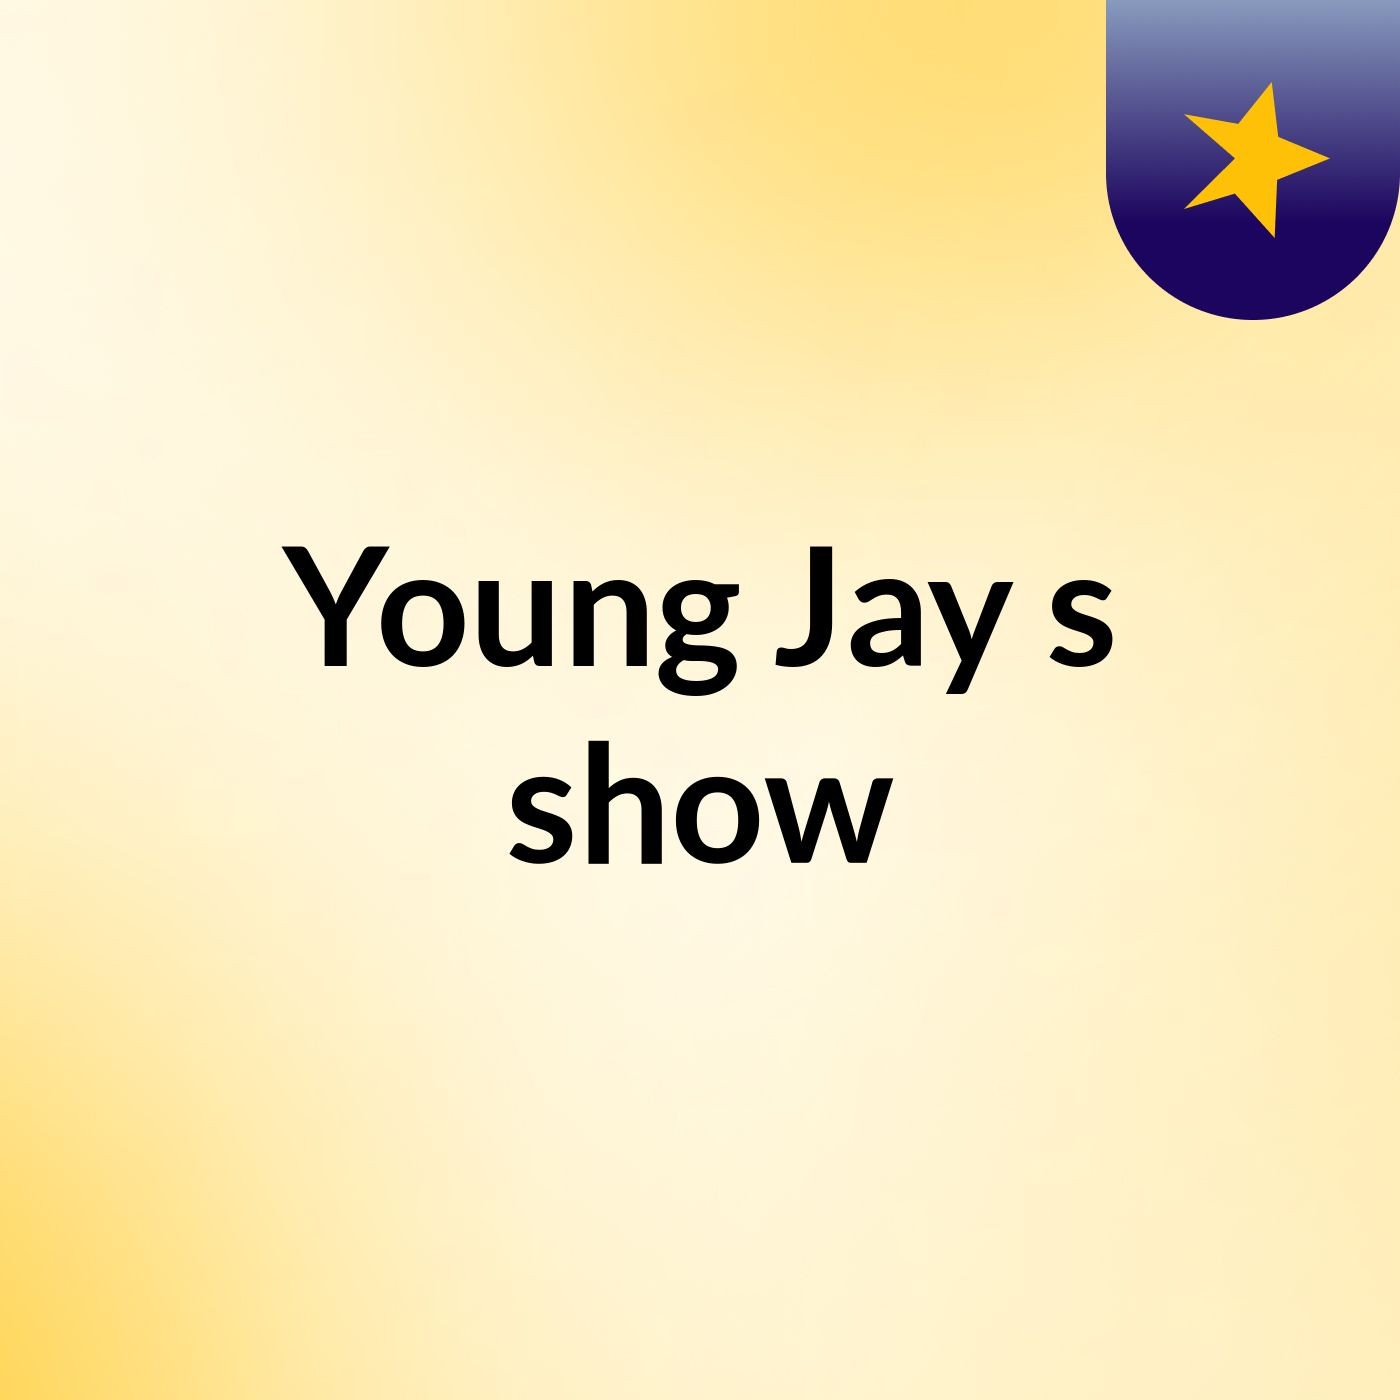 Young Jay's show